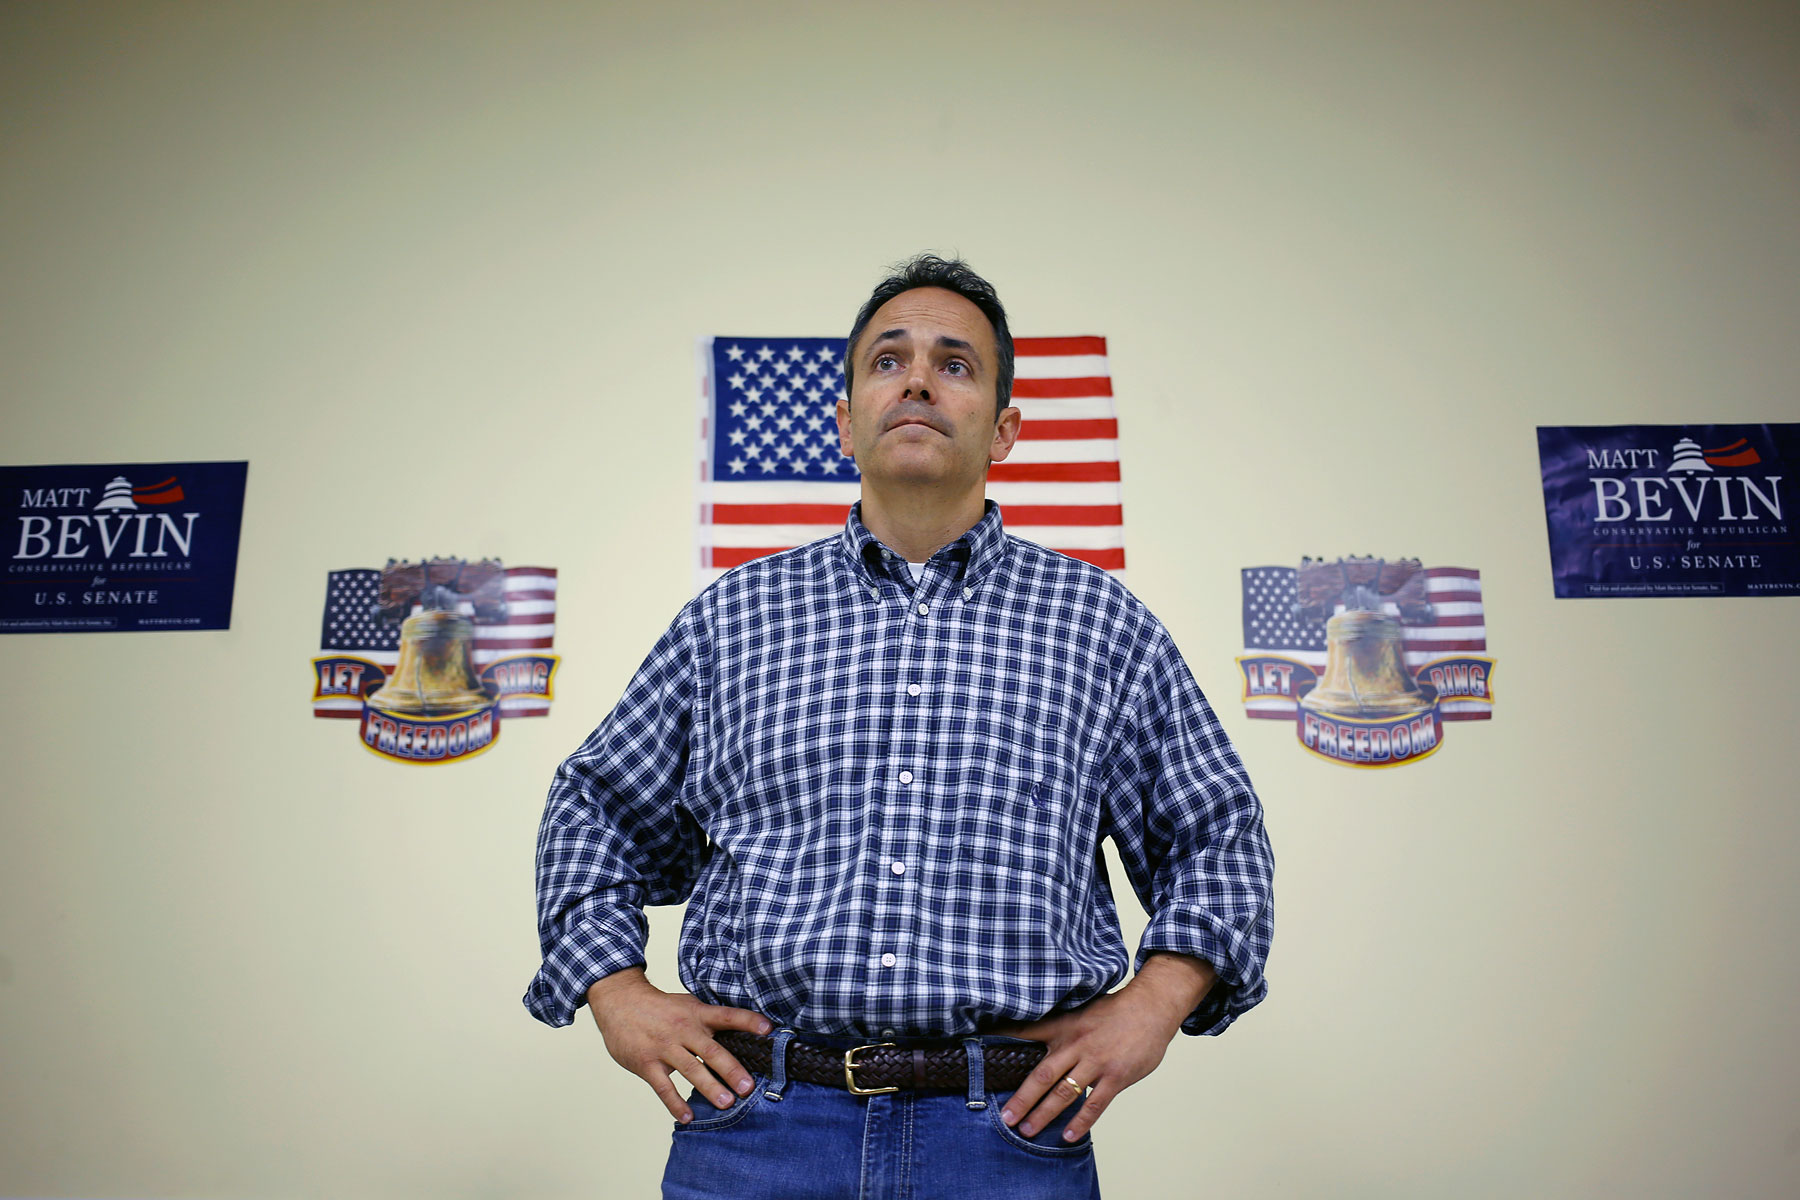 Louisville businessman Matt Bevin speaks during a meeting of the Spencer County Tea Party at the Kentucky Farm Bureau in Taylorsville, Ky., October 15, 2013.